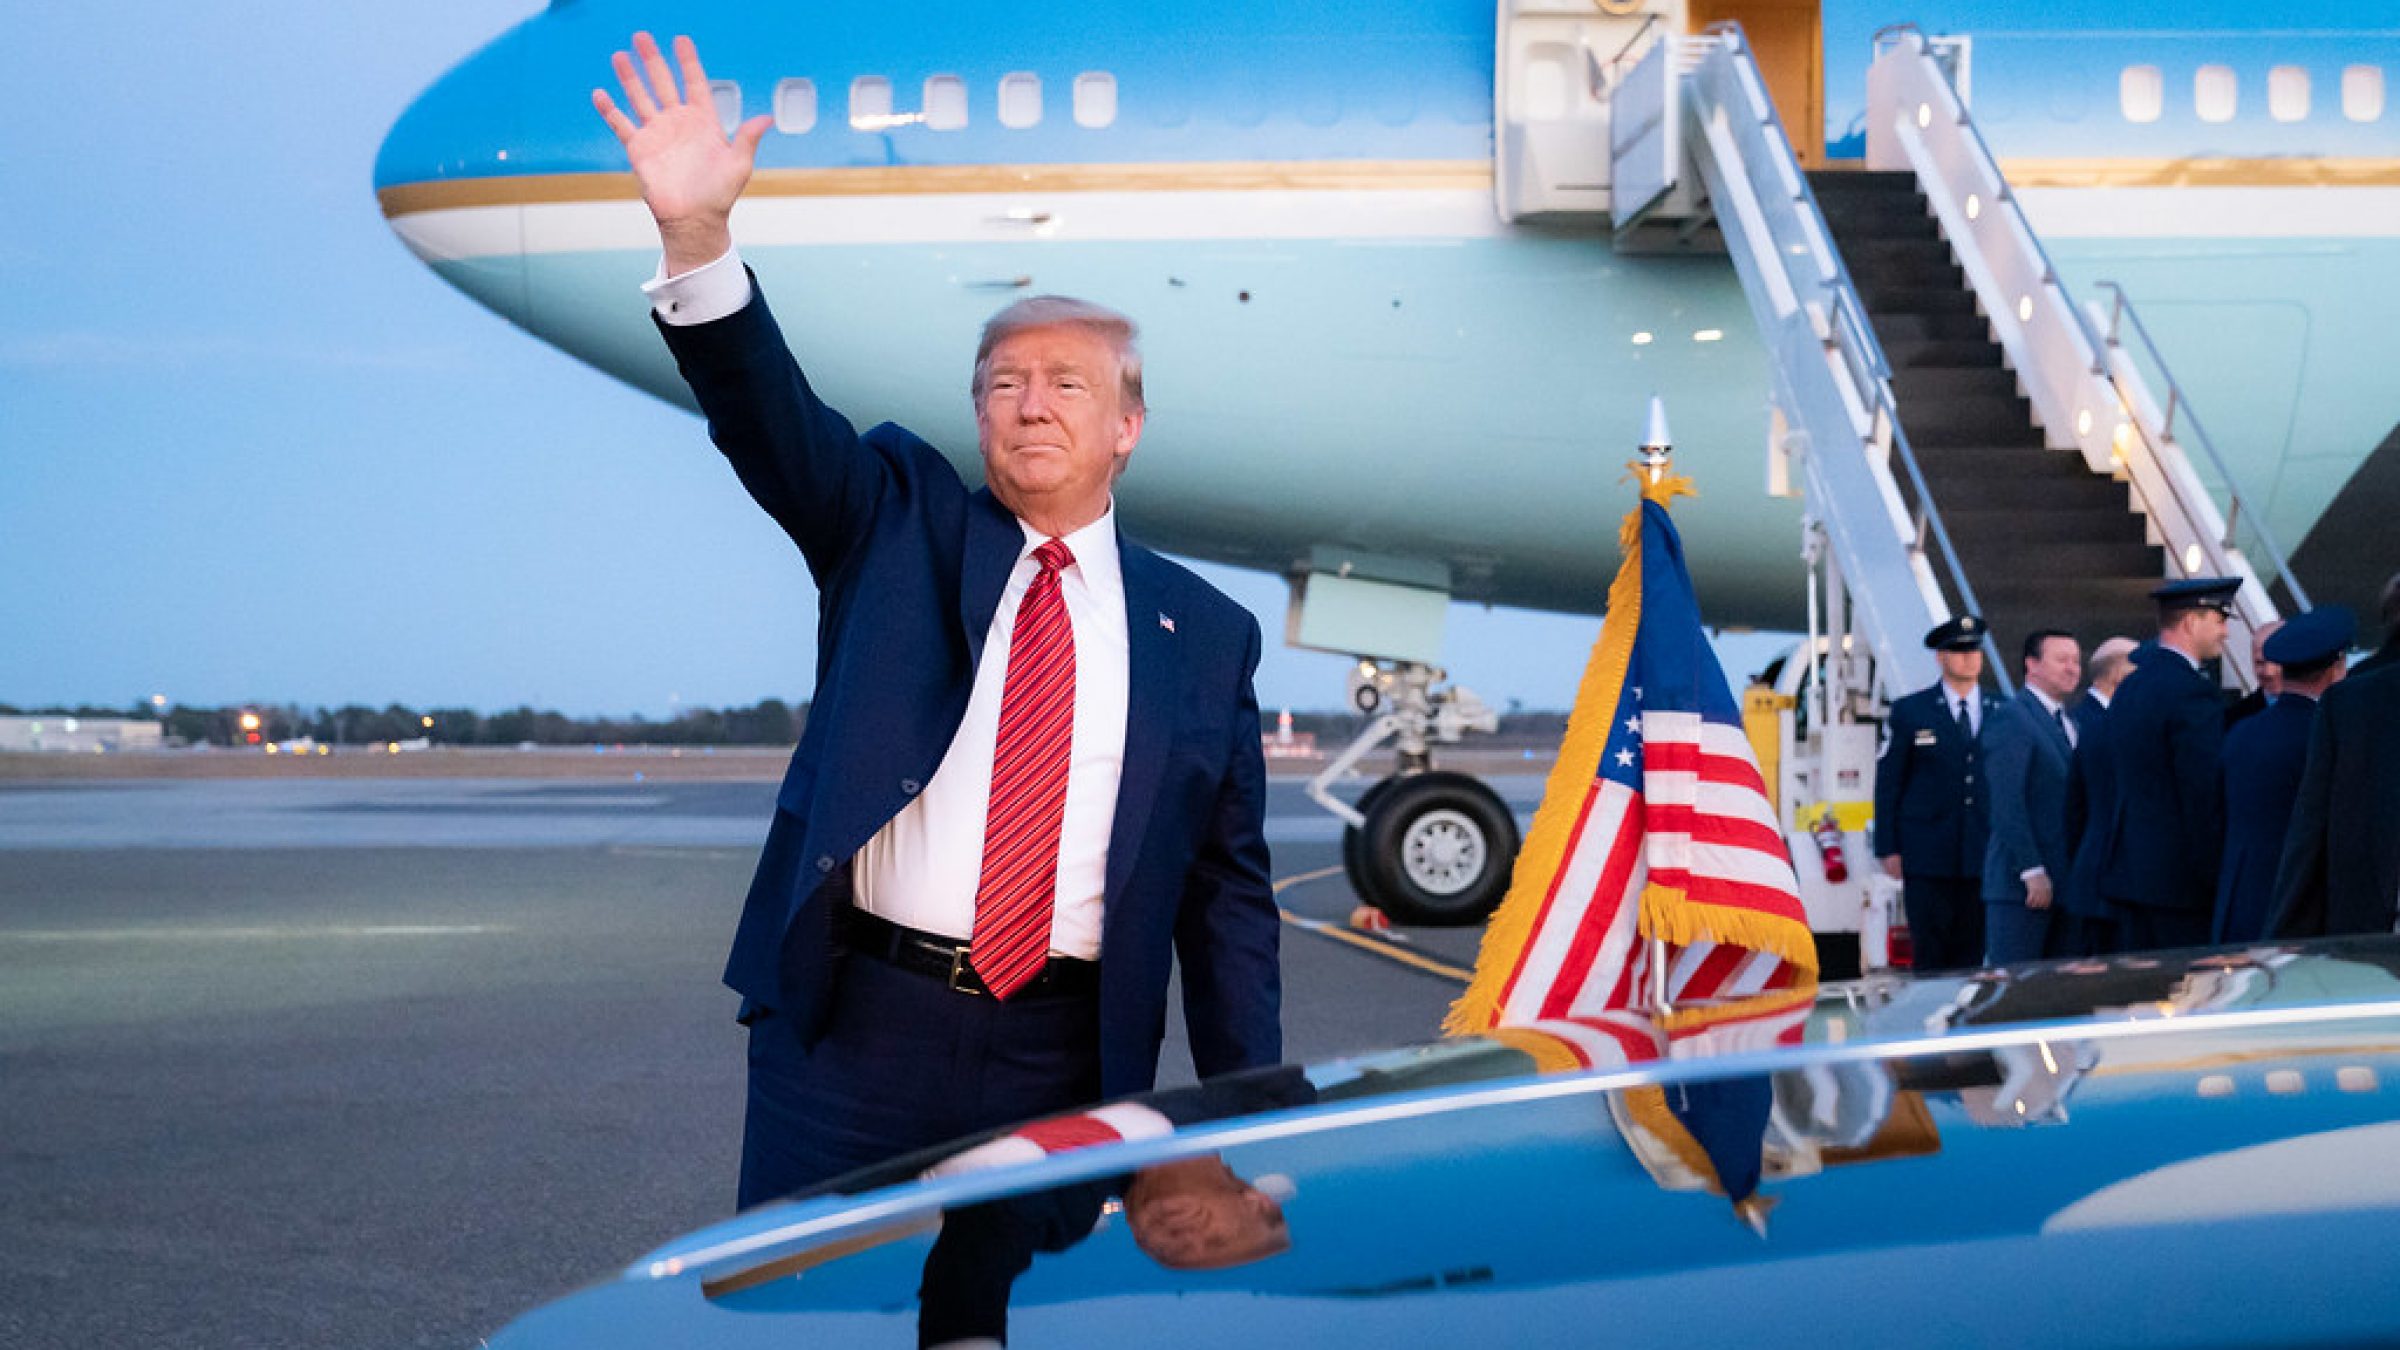 Donald Trump waves while near Air Force One